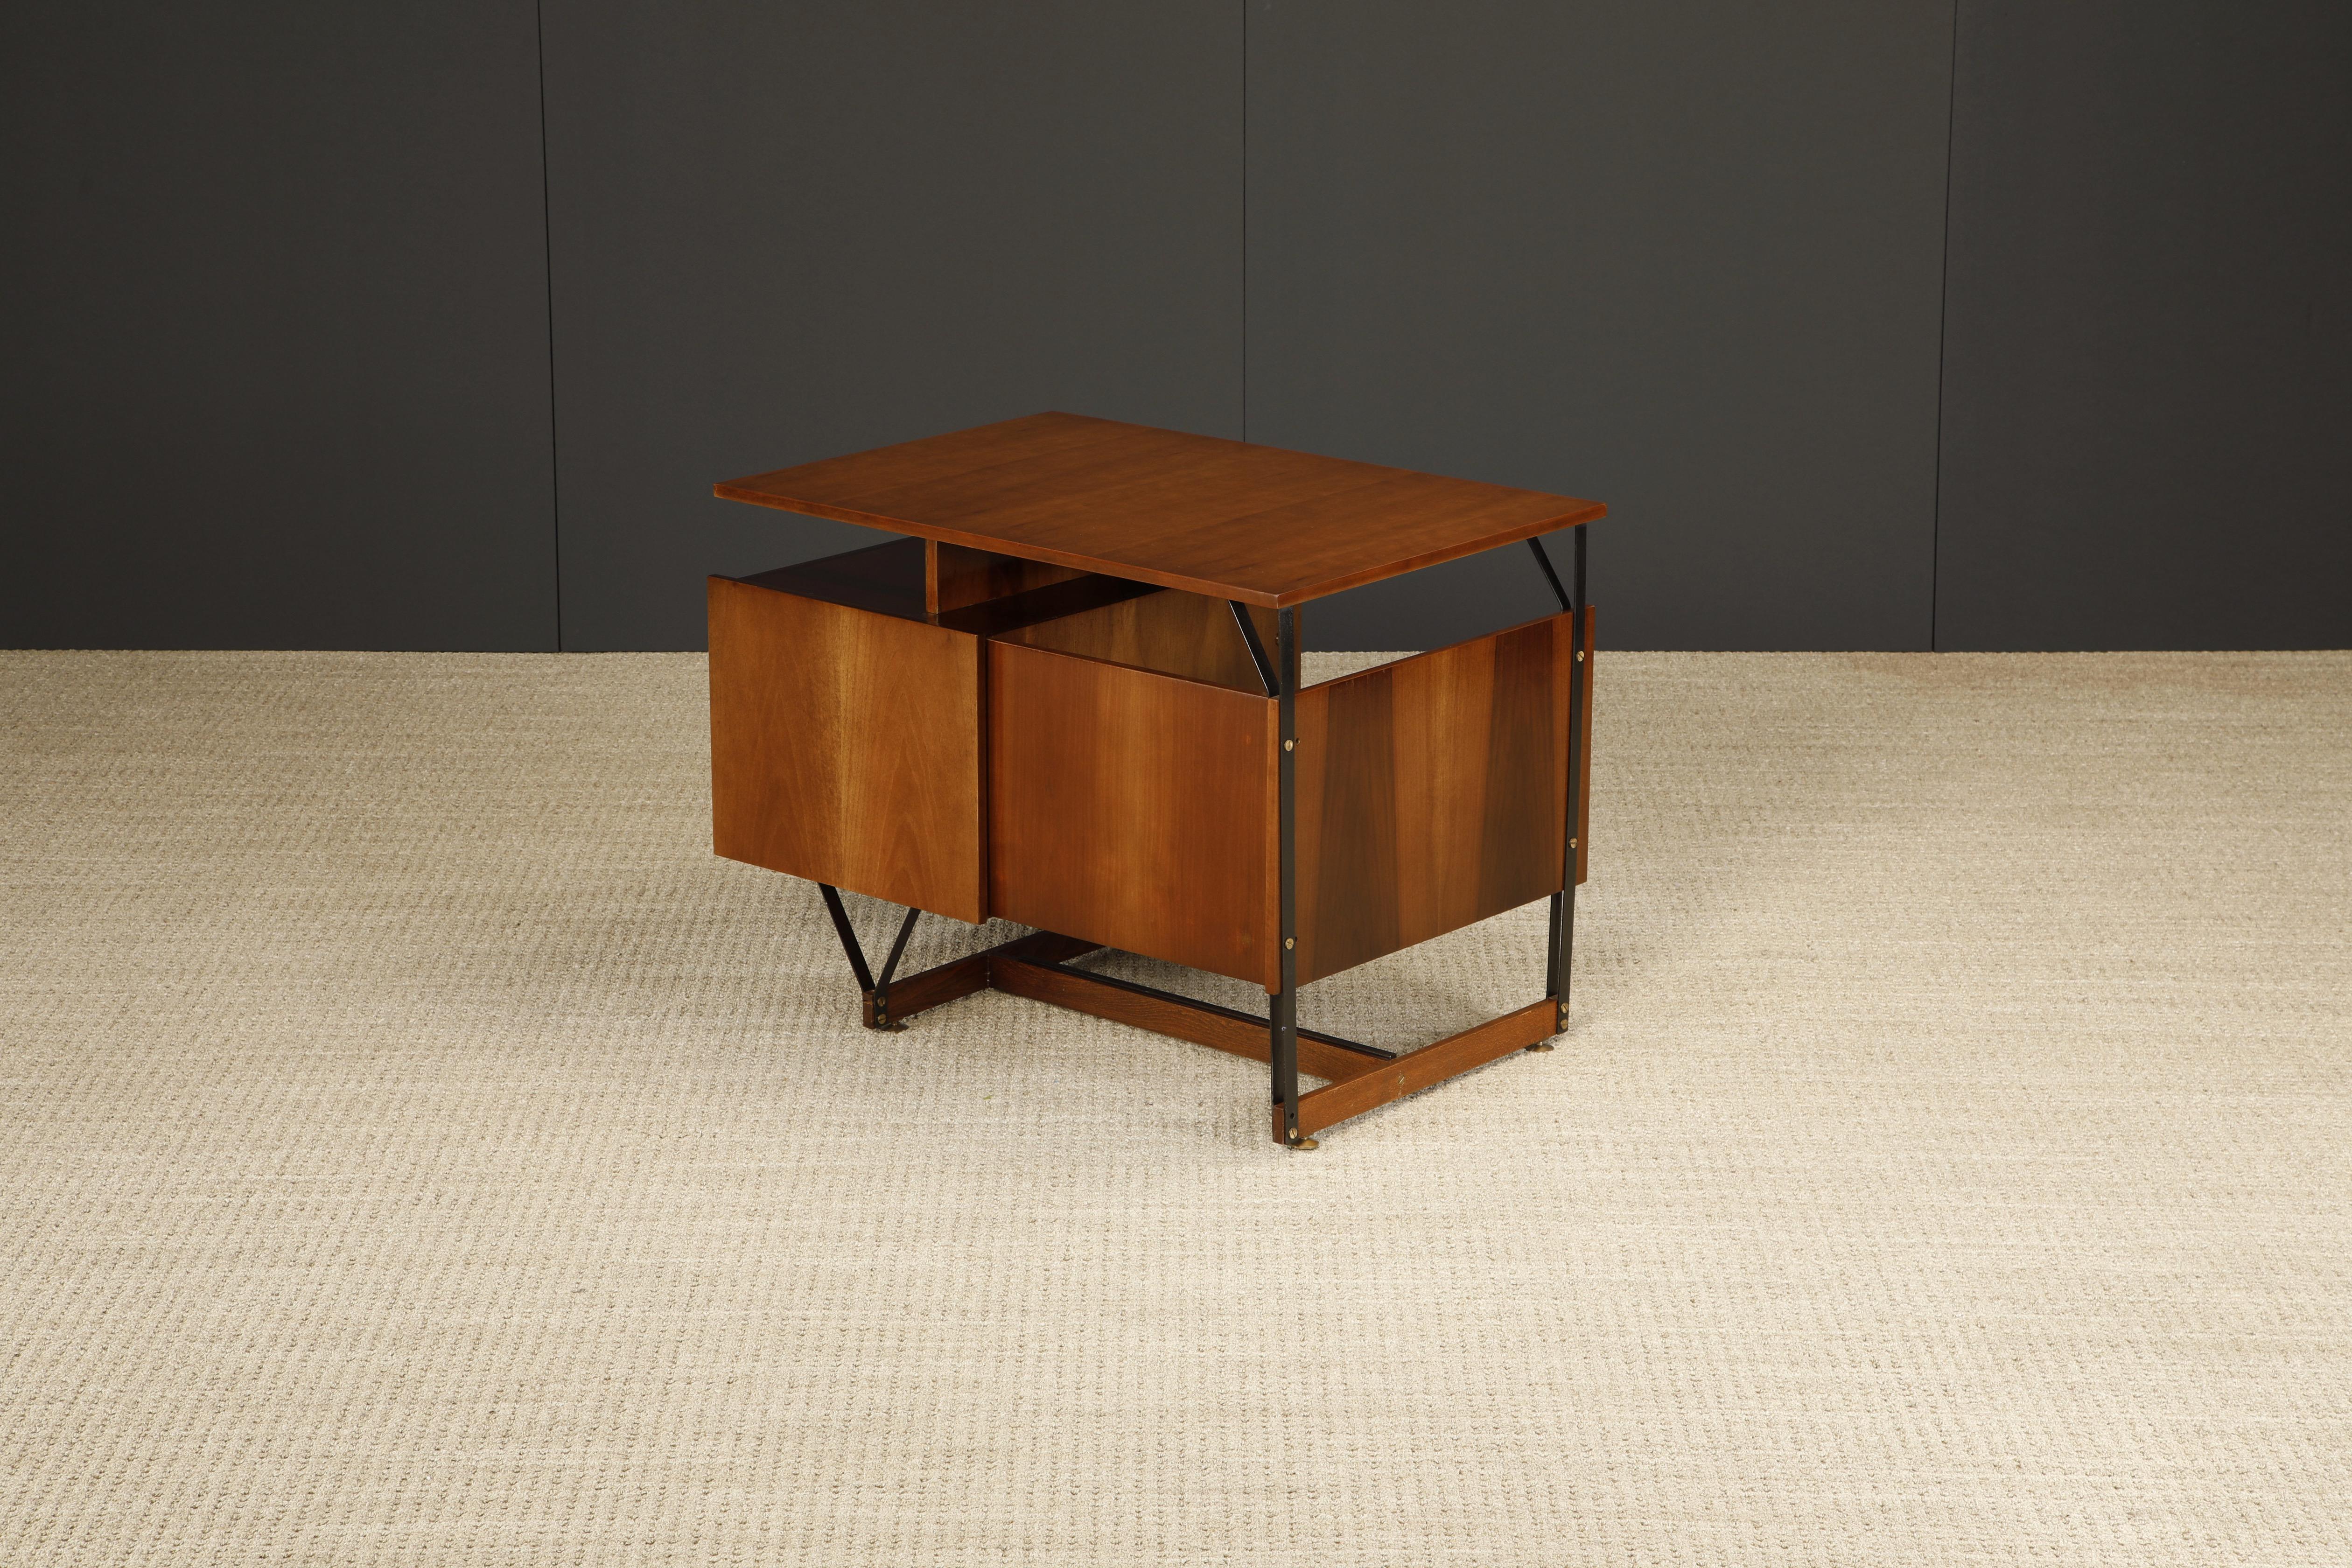 Italian Mid-Century Modern Desk, Style of Gio Ponti, c 1950s, Refinished For Sale 5